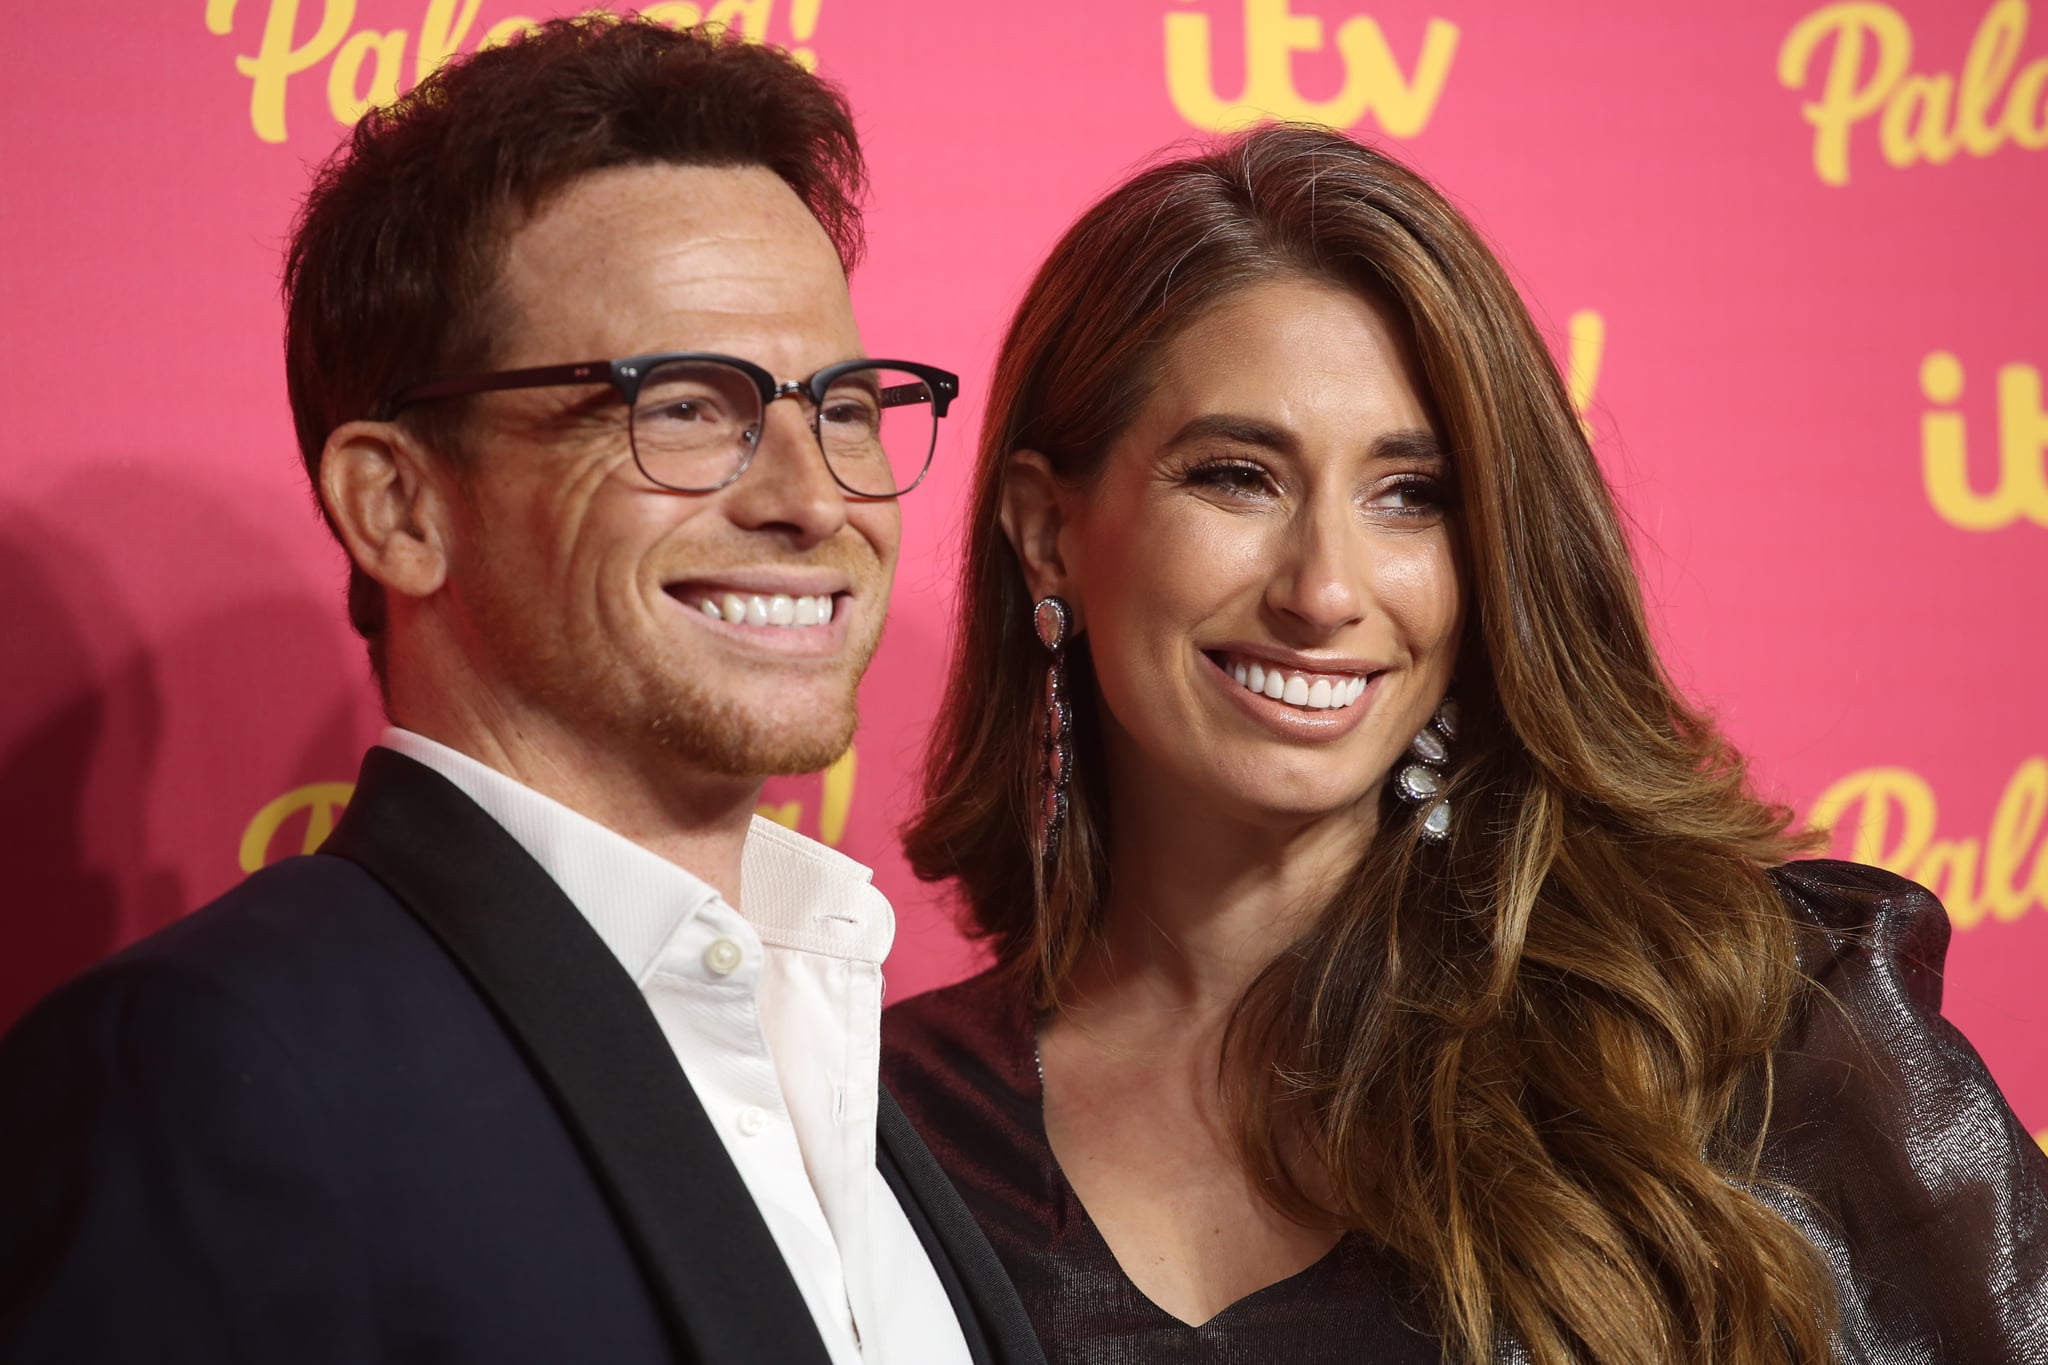 LONDON, ENGLAND - NOVEMBER 12: Joe Swash and Stacey Solomon attend the ITV Palooza 2019 at The Royal Festival Hall on November 12, 2019 in London, England. (Photo by Lia Toby/Getty Images)